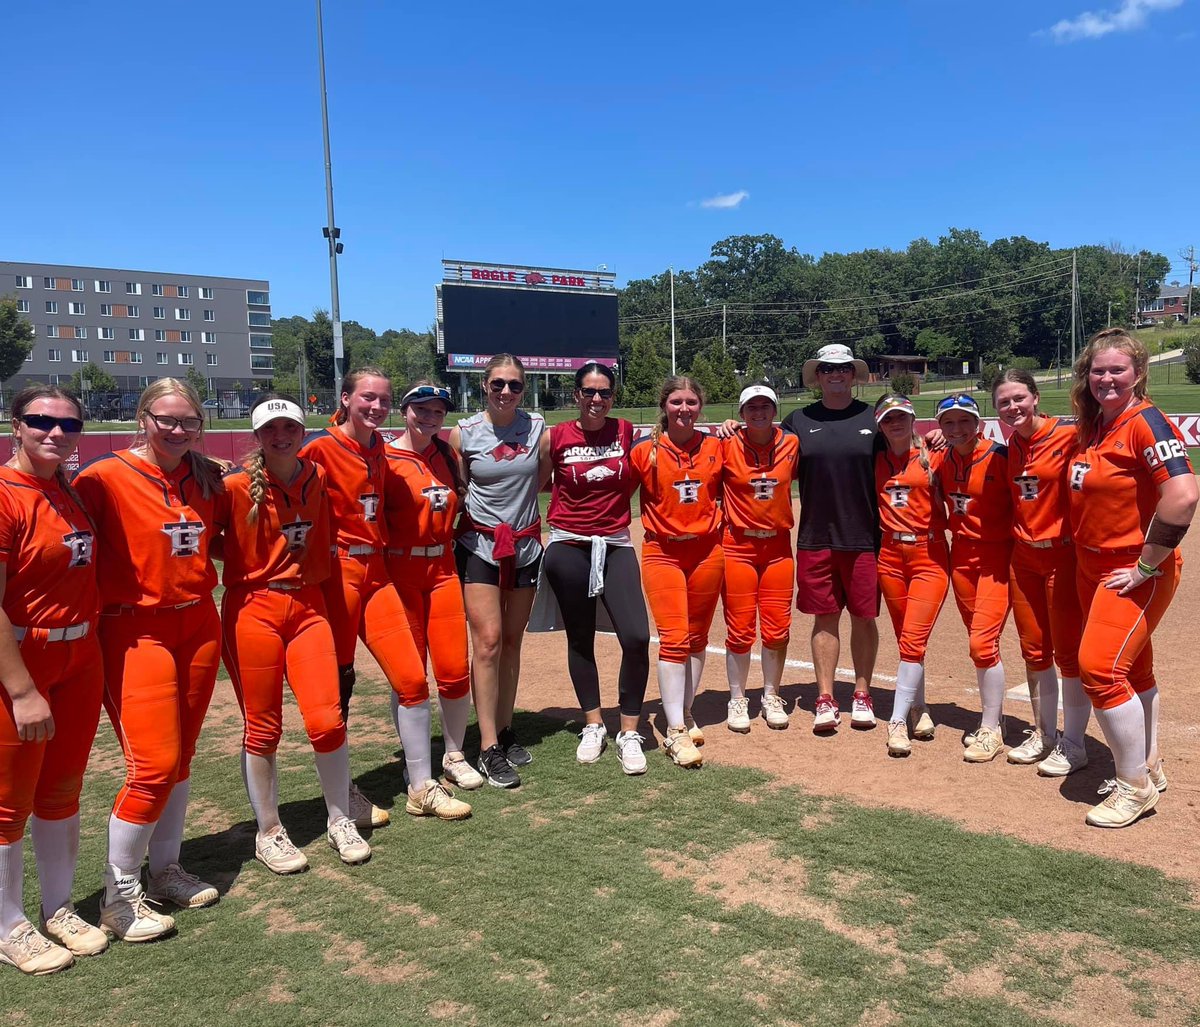 Had a great time at the @RazorbackSB team camp! Thank you @CoachDeifel for this amazing opportunity to play on Bogle Field! @Spects_CoachP @CoachMartyR @djgasso @danielleeee41